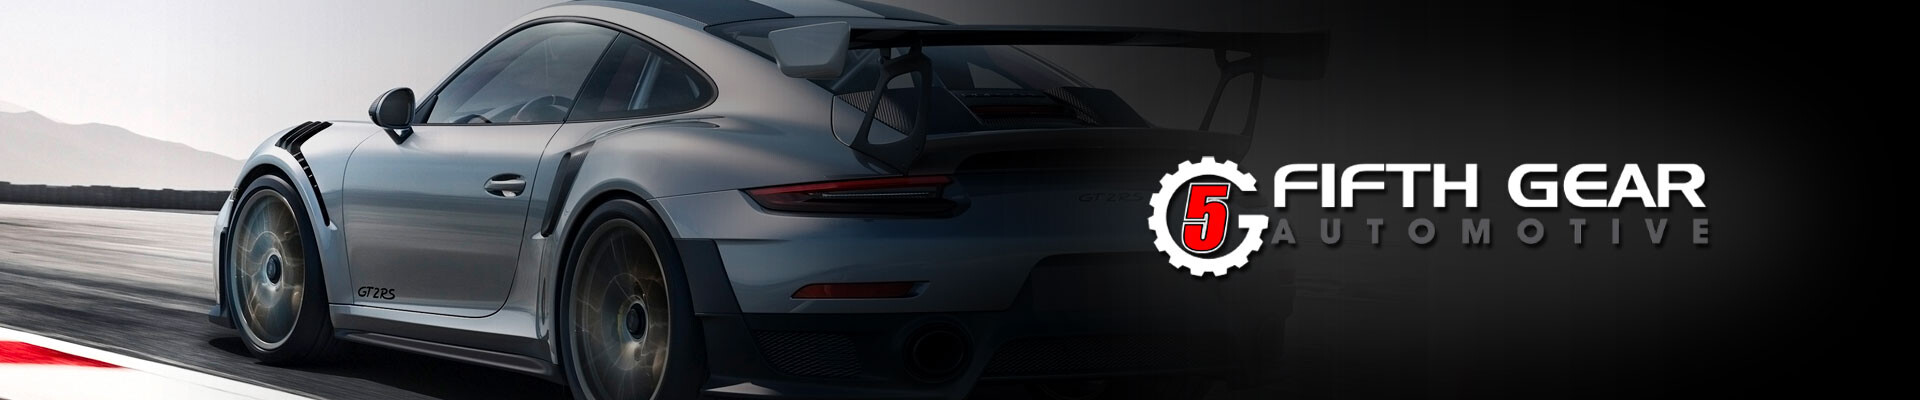 Header Porsche Repair in Lewisville, TX by Fifth Gear Autosports a leading Porsche repair specialist in Texas specializing in Porsche repair, maintenance, performance tuning and service.